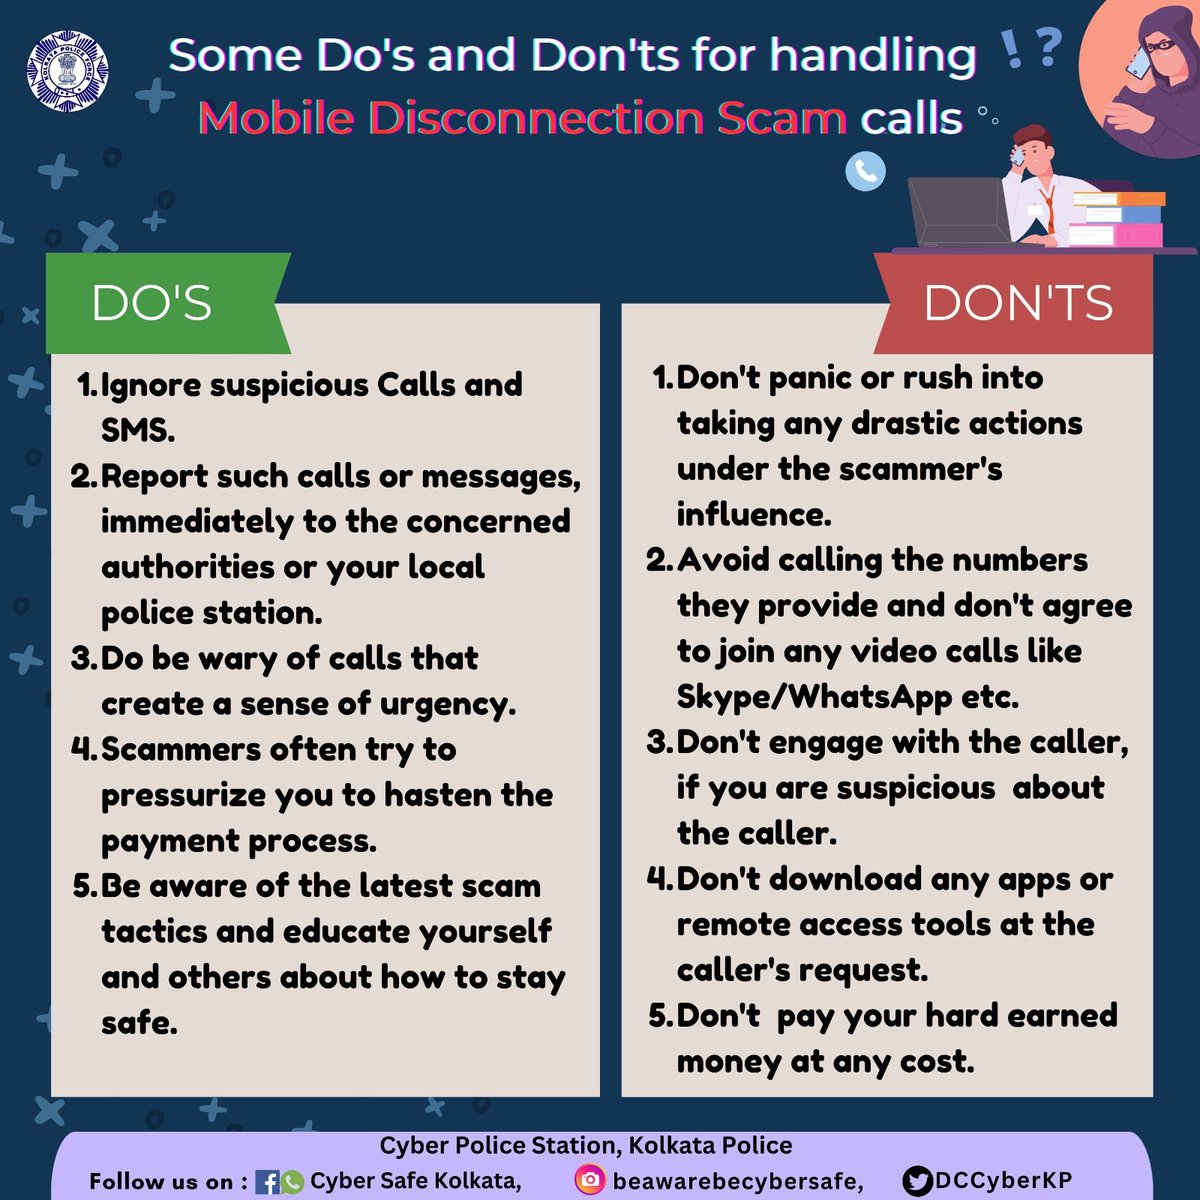 Do's & Don'ts for handling Mobile Disconnection Scam calls. #cyberaware